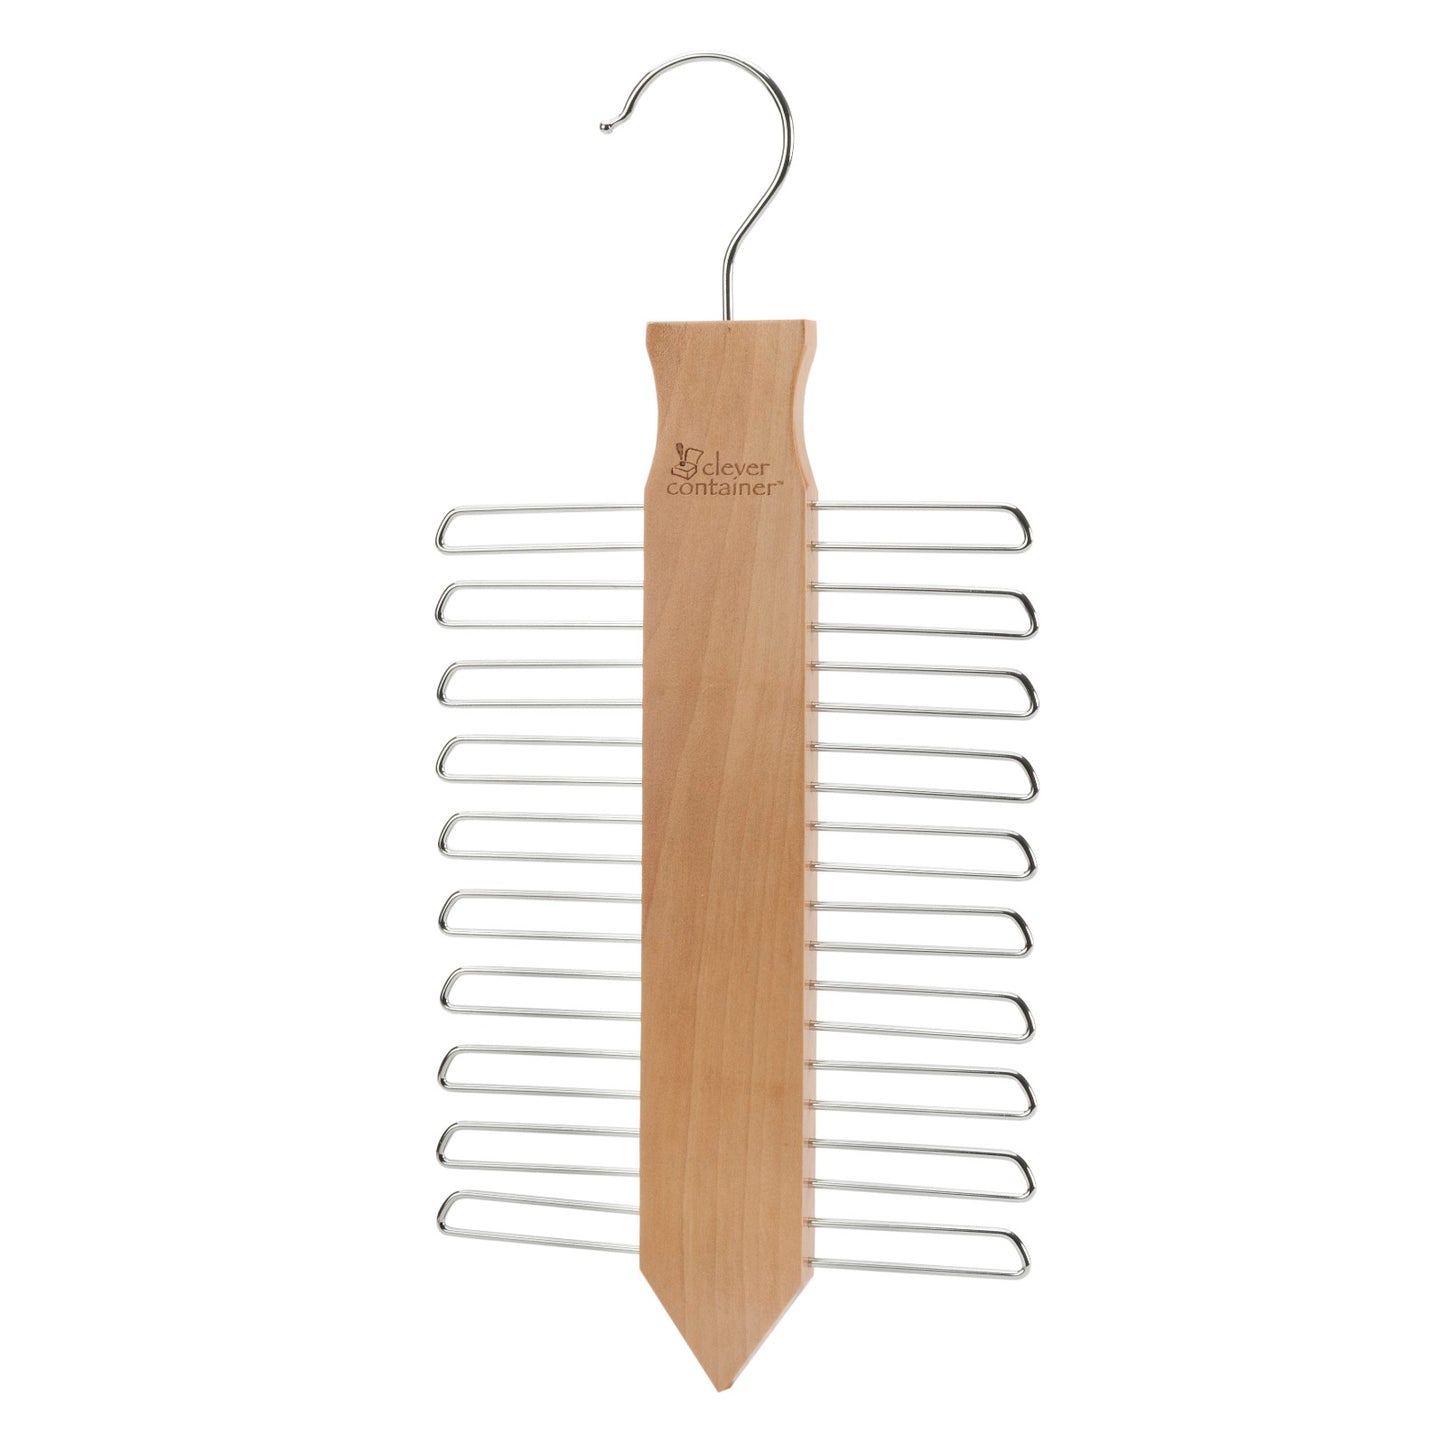 Trio of Speciality Wooden Hangers- 1 of each - Bundle